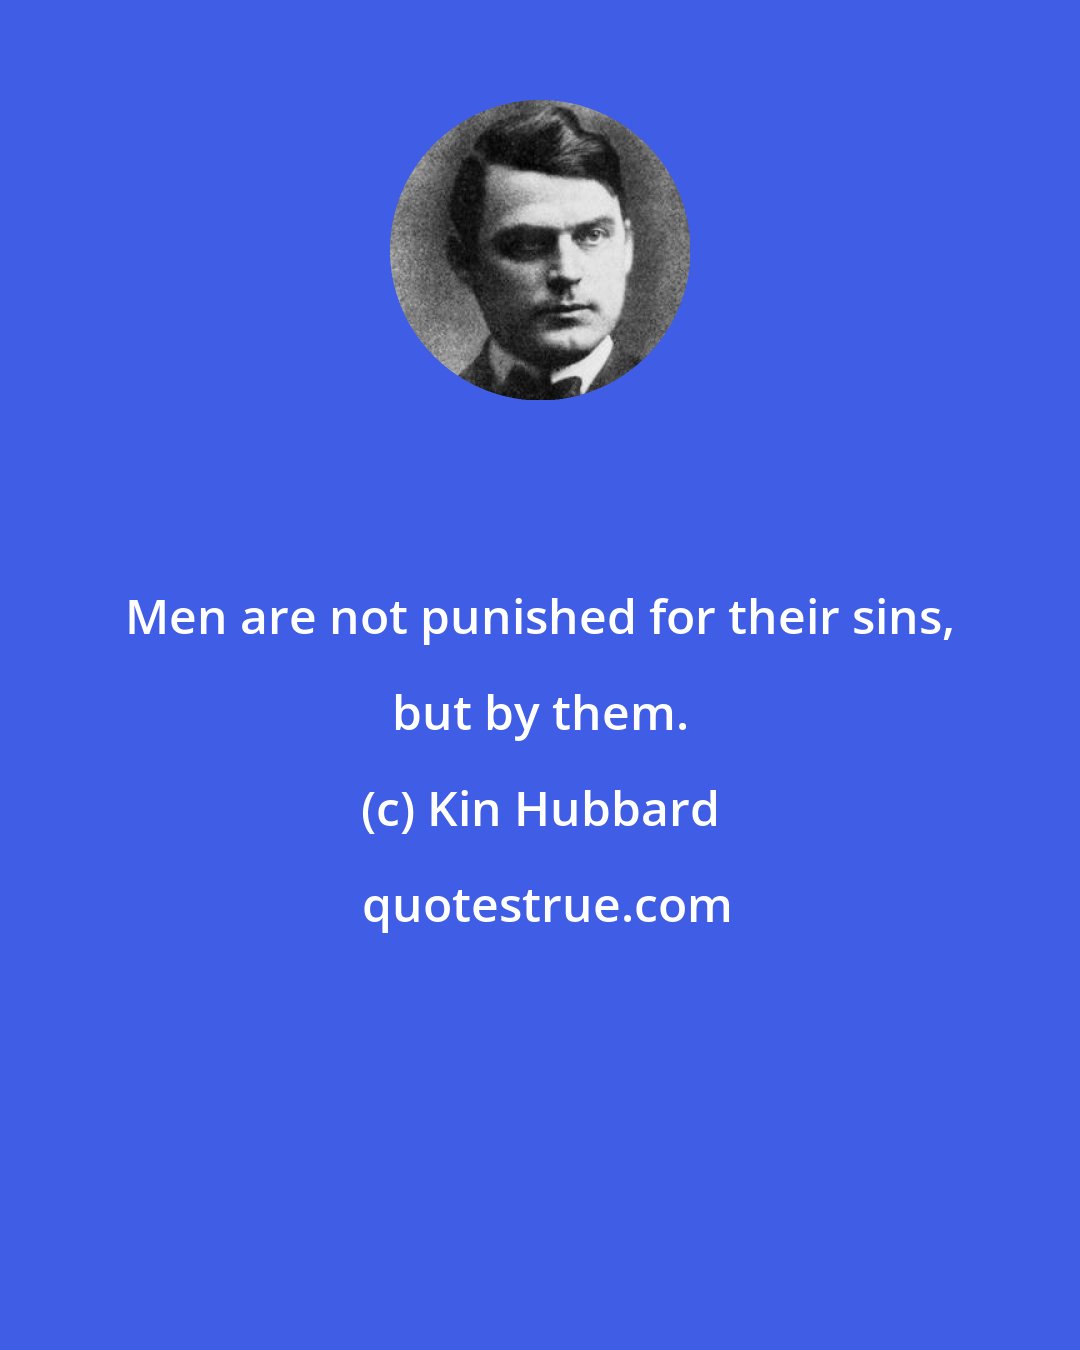 Kin Hubbard: Men are not punished for their sins, but by them.